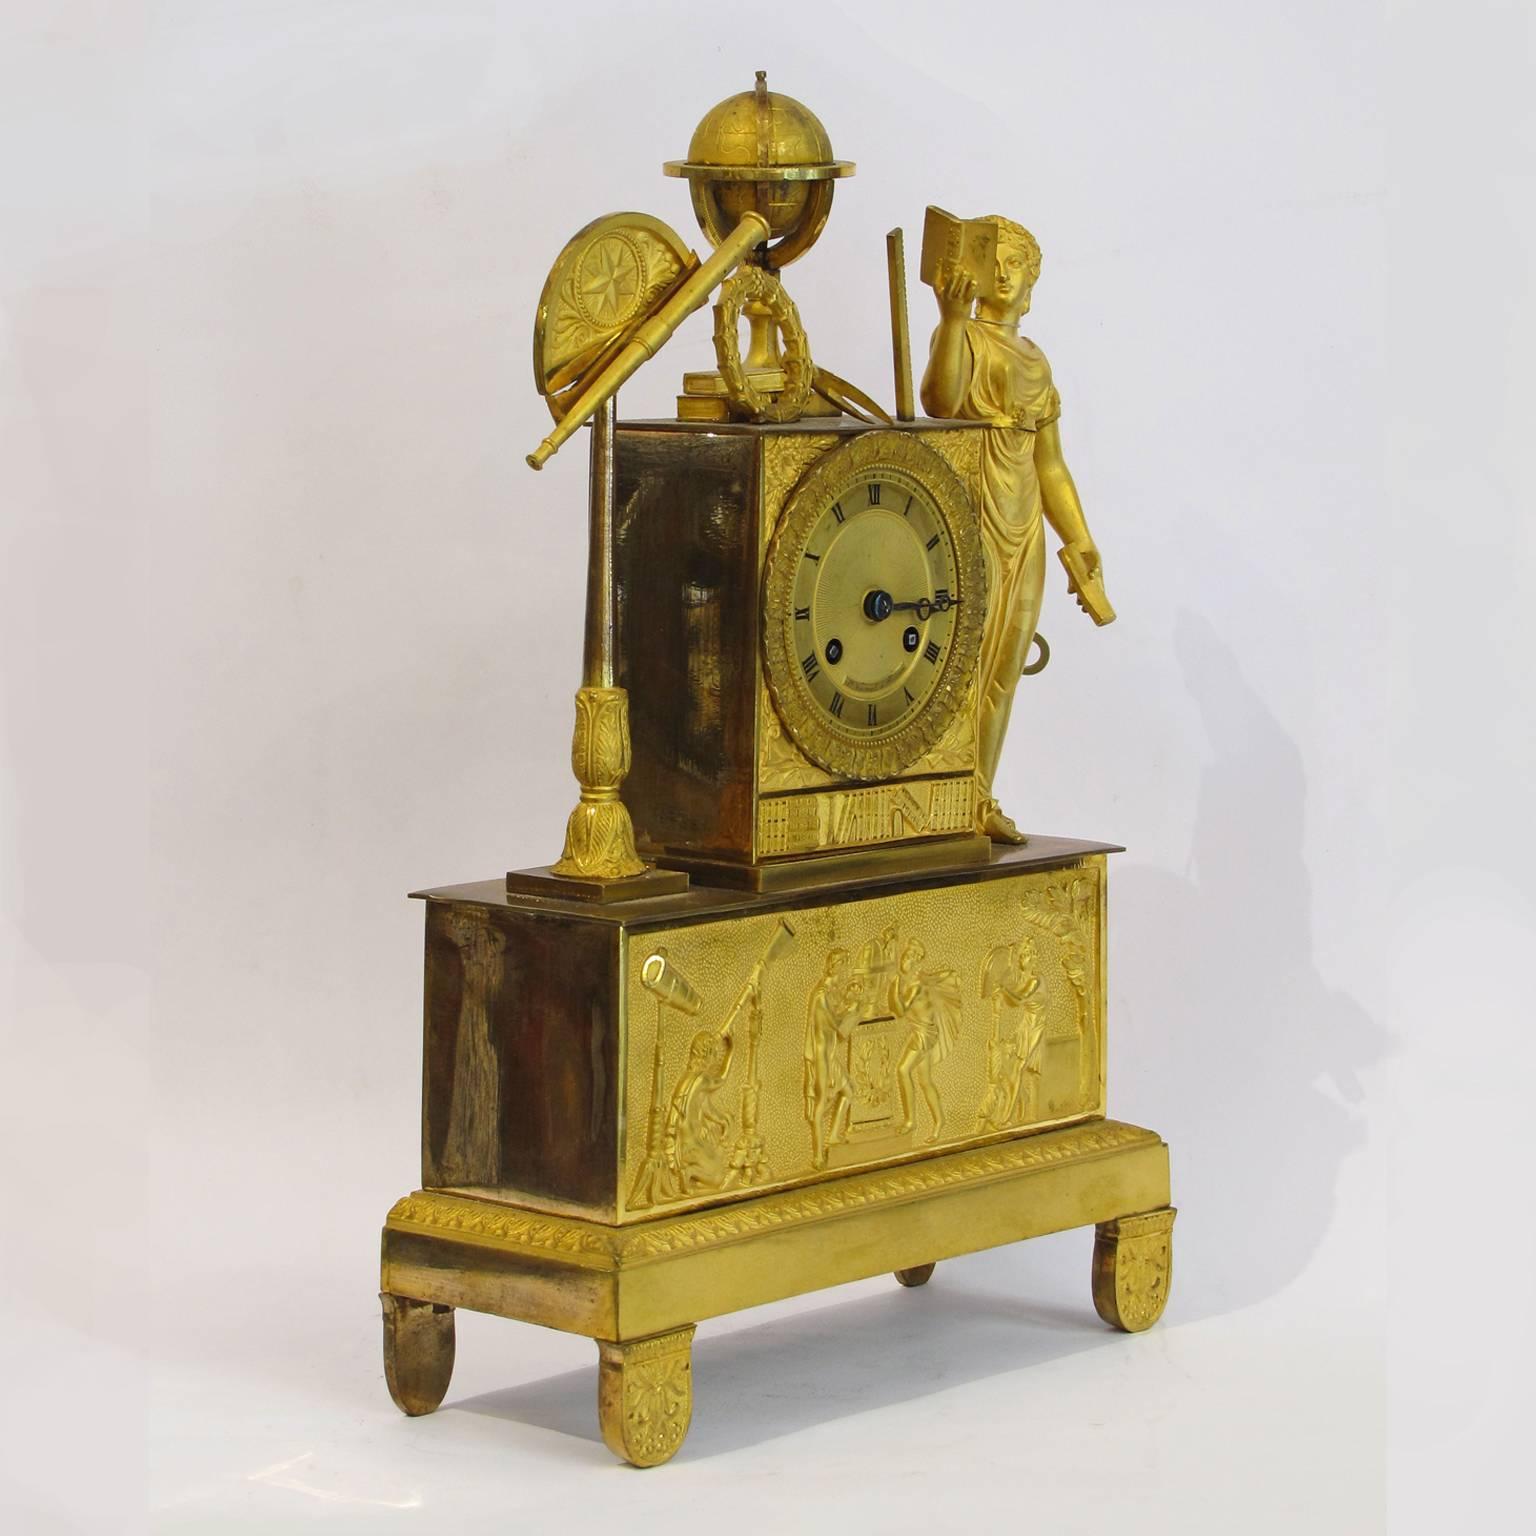 An amazing French neoclassical gilt bronze pendulum clock retaining its original ormolu gilding with matte finishes and details made using the technique of lost-wax casting.
The rectangular base is enriched by a relief on its front side showing the